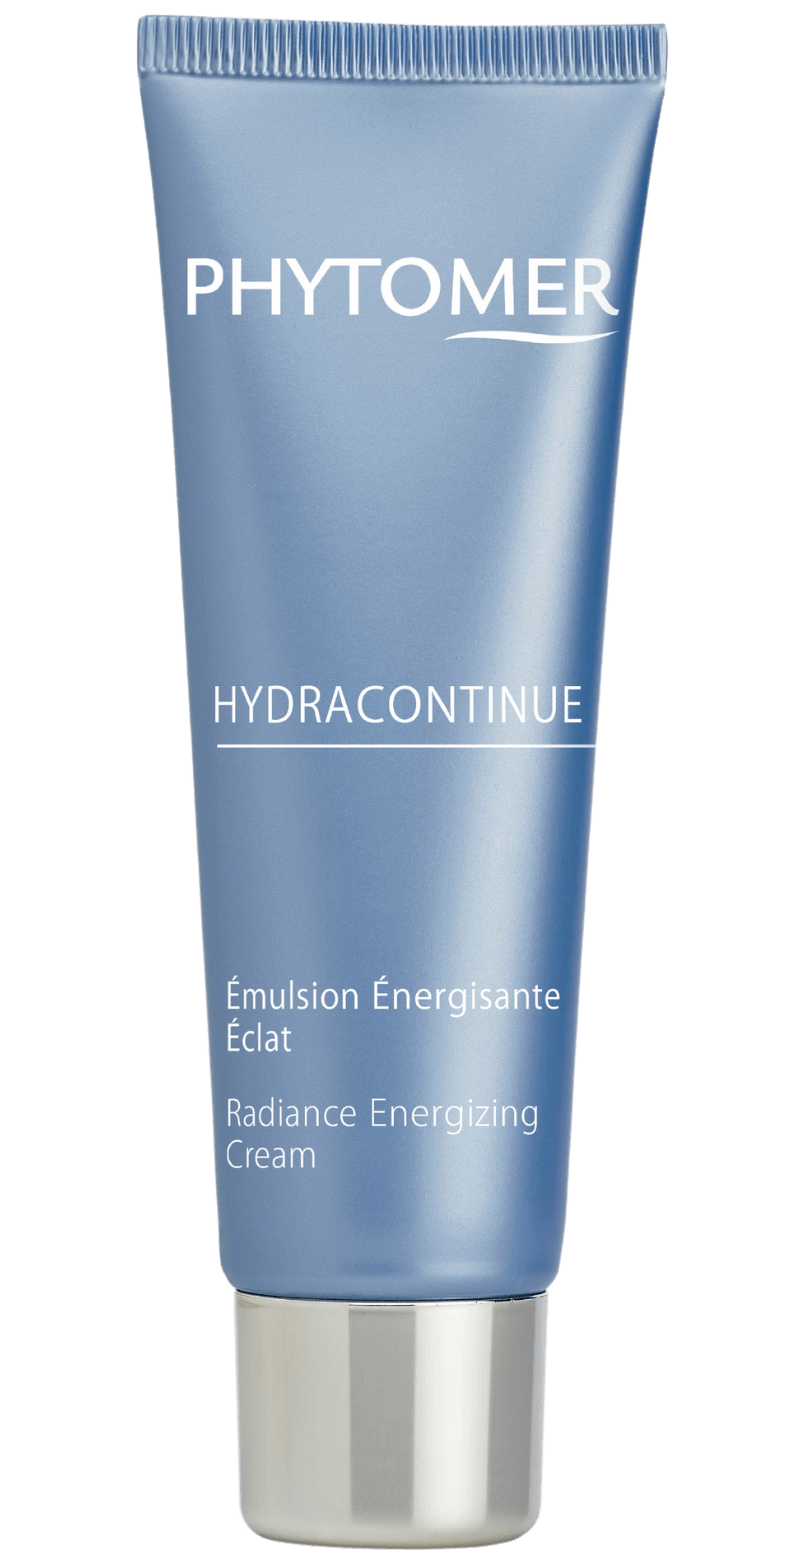 's Phytomer HYDRACONTINUE Radiance Energizing Cream - Bellini's Skin and Parfumerie 